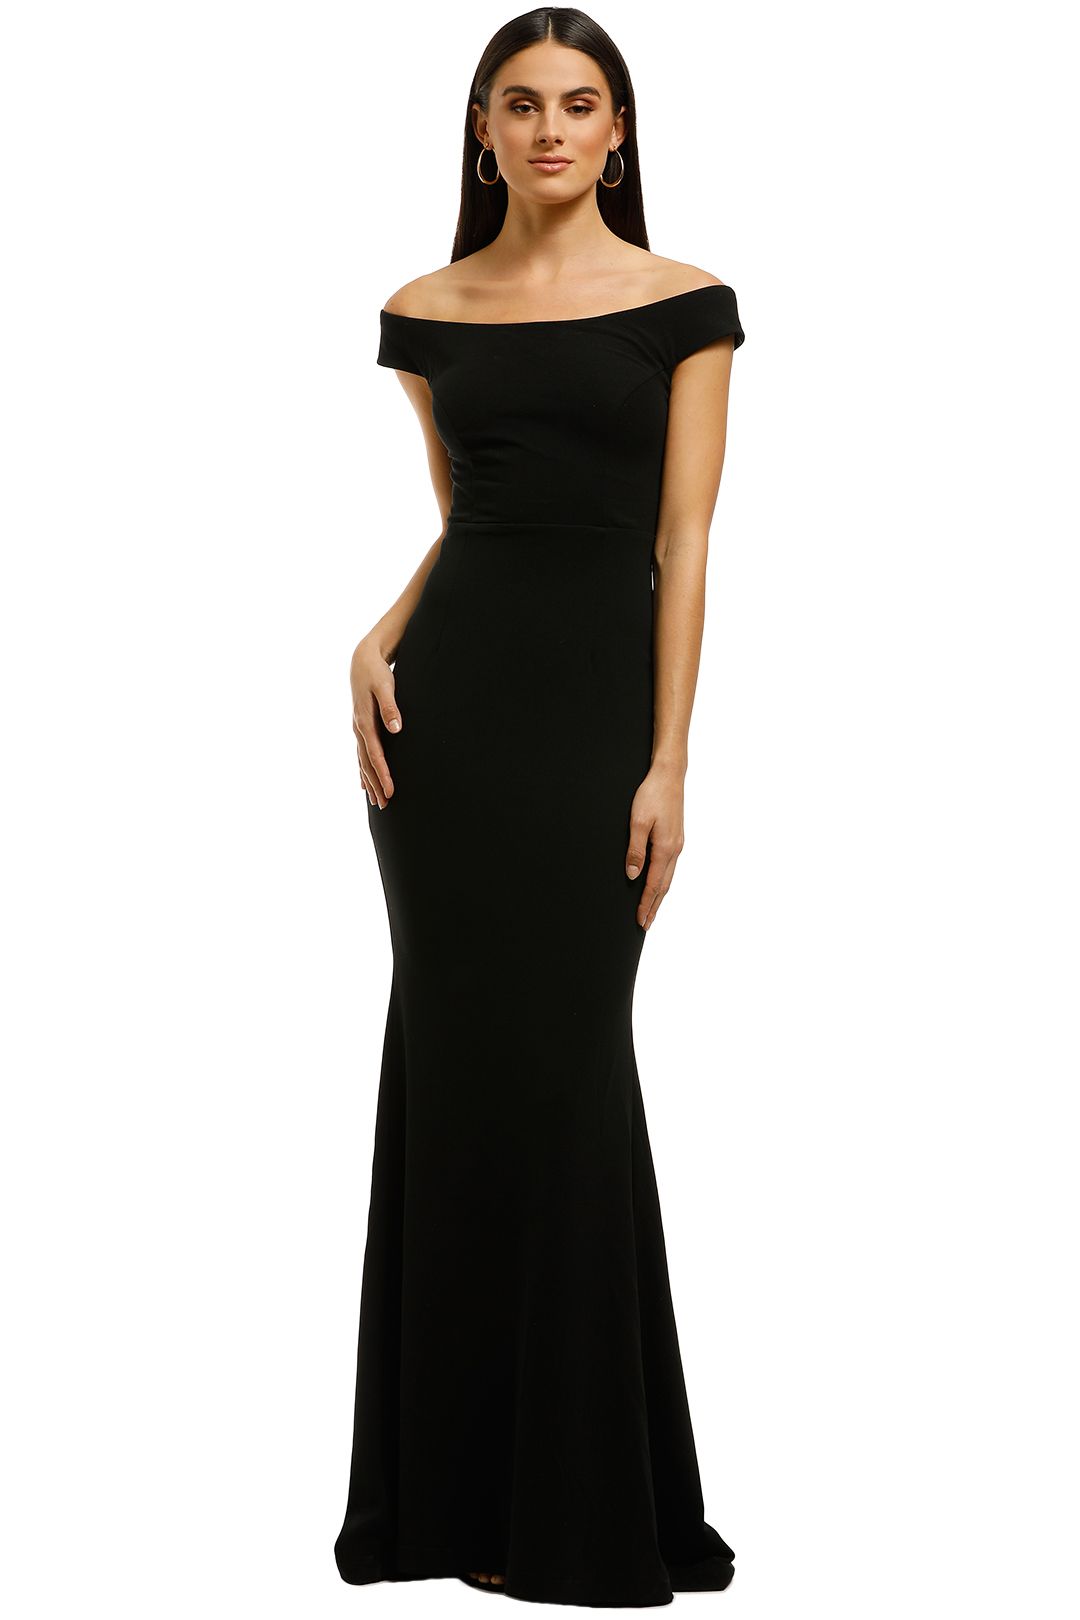 Samantha-Rose-Thompson-Gown-Black-Front